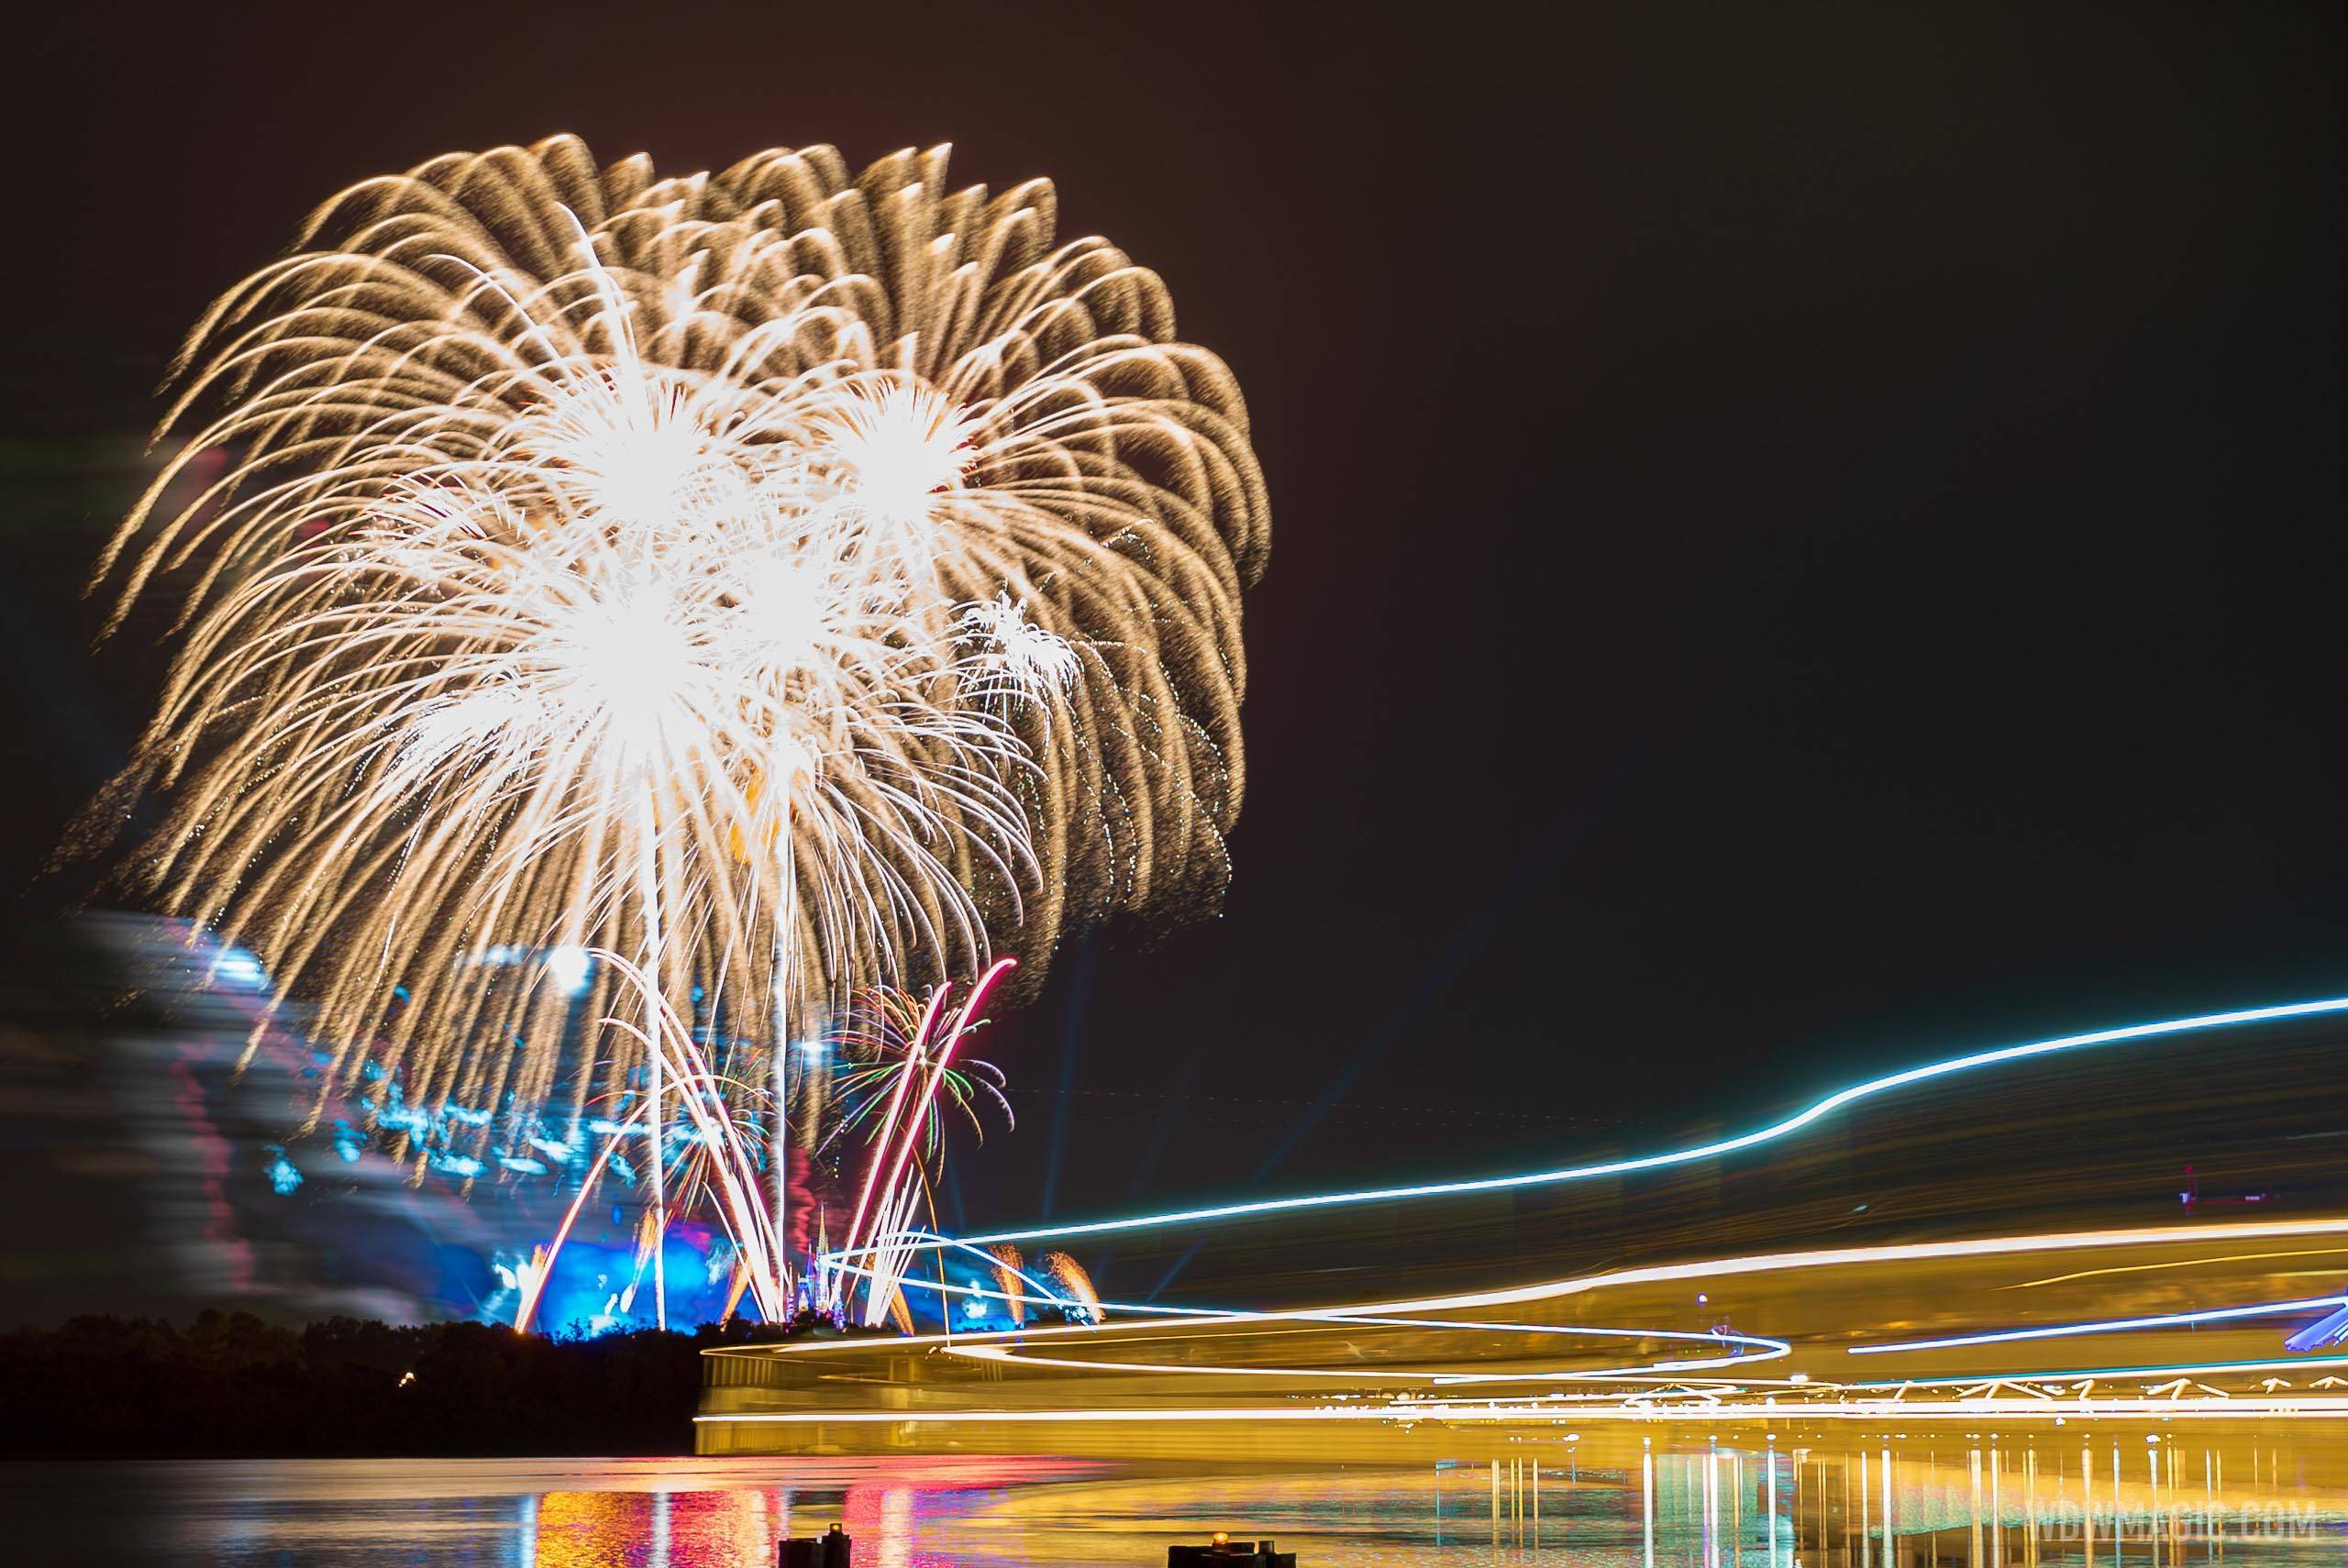 Set sail with a fireworks dessert party on the Seven Seas Lagoon with 'Ferrytale Wishes - A Fireworks Dessert Cruise'